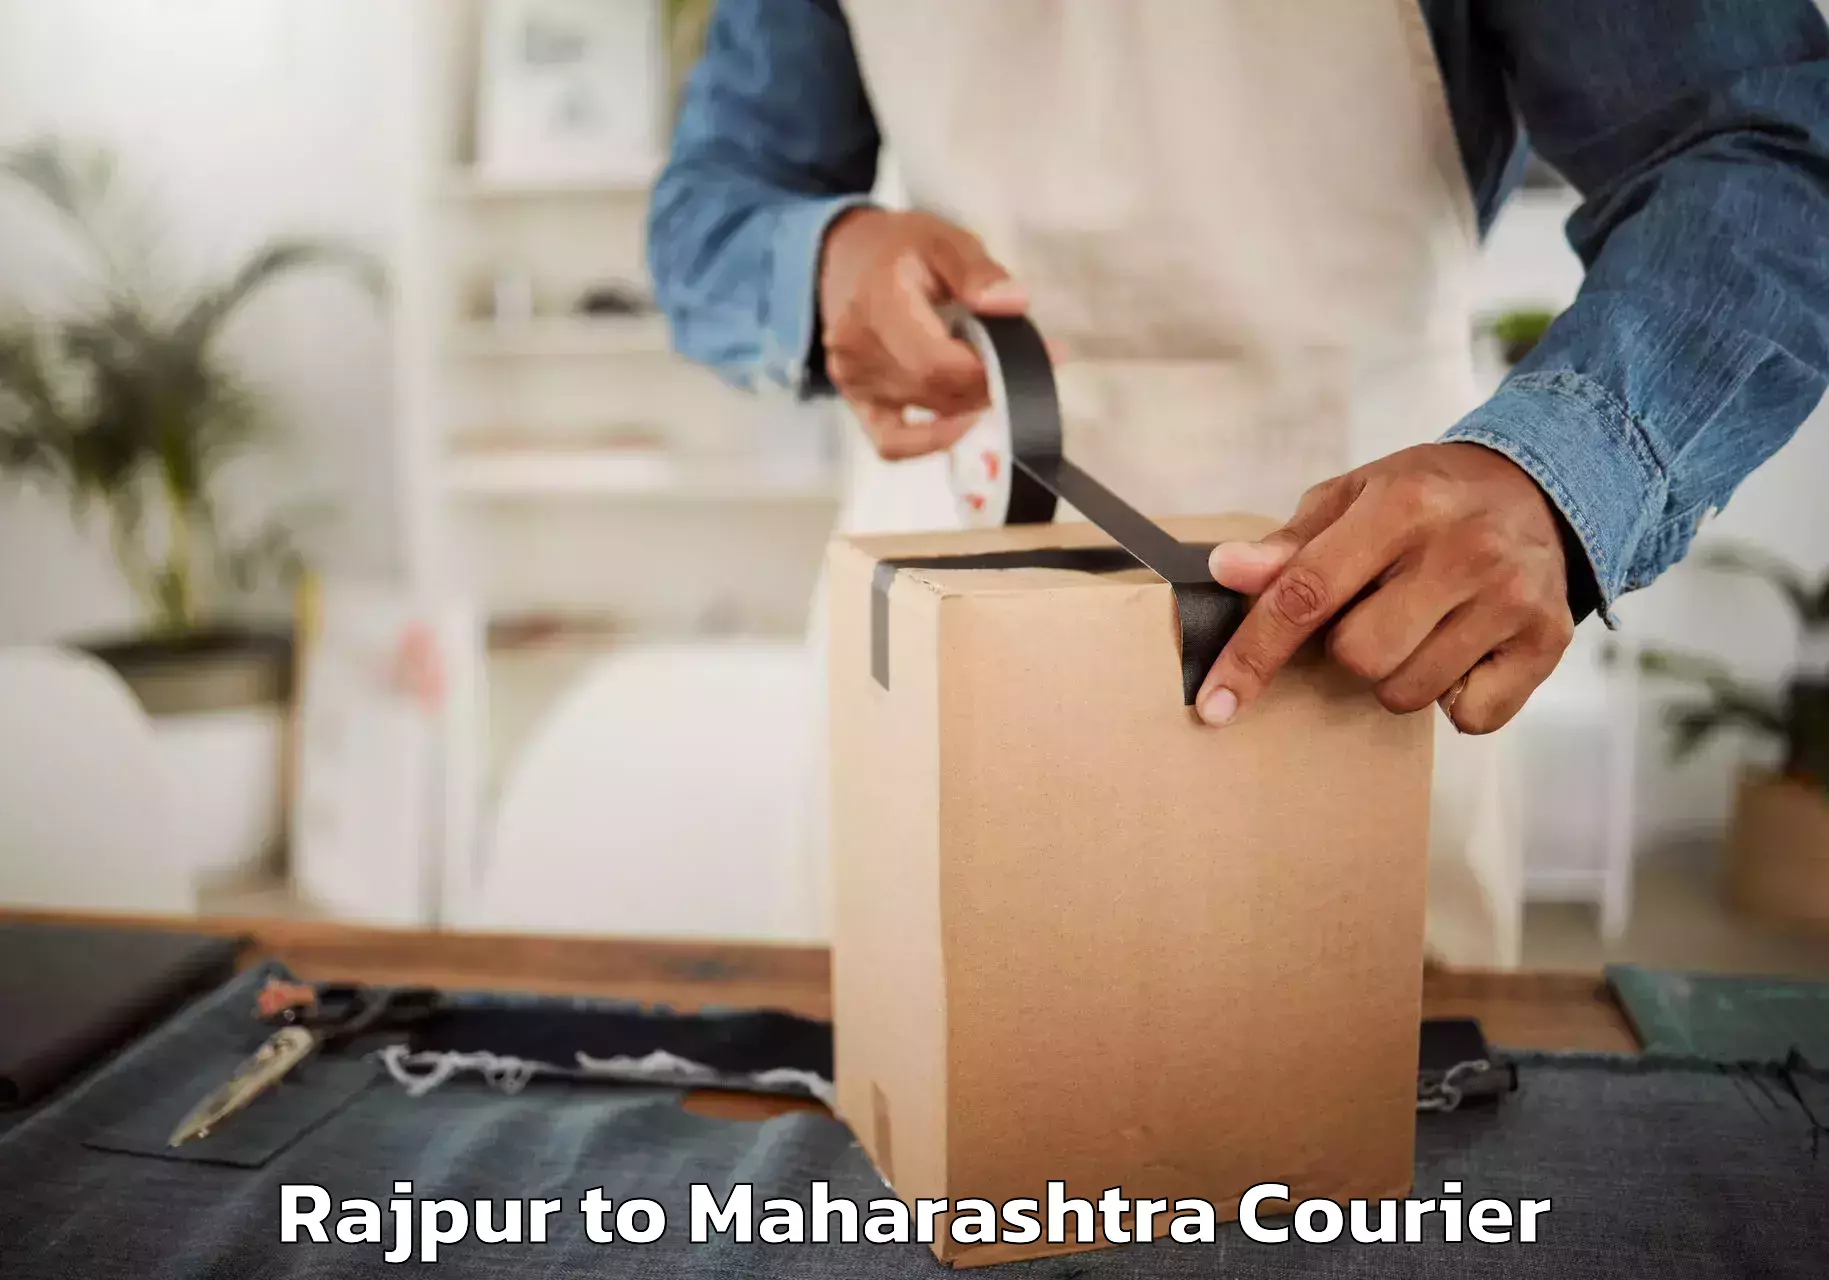 Trusted relocation experts Rajpur to Maharashtra